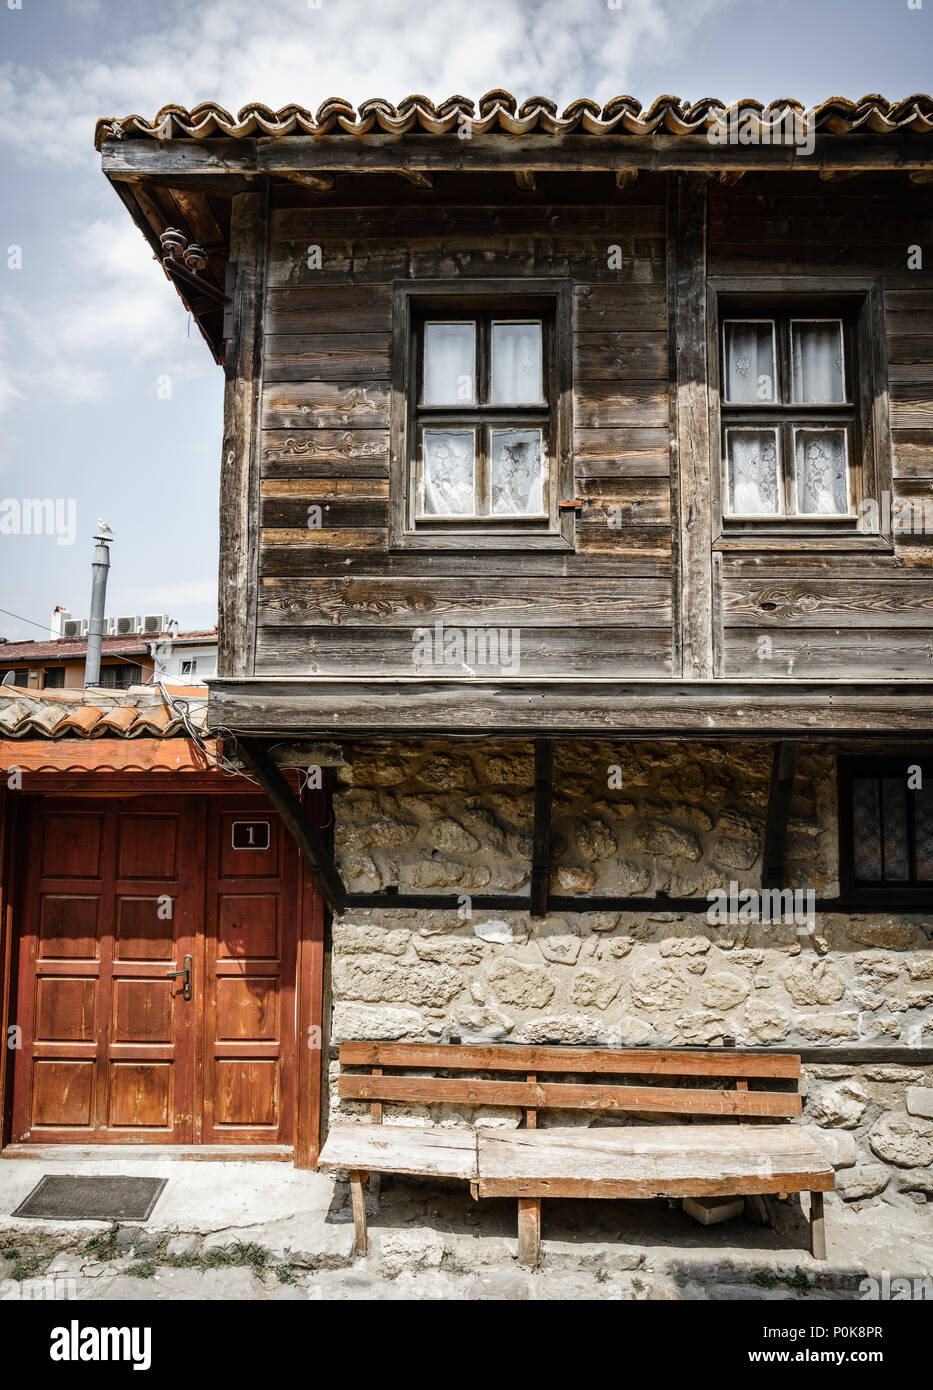 Fragment of a traditional residential house in the town of Nessebar, Bulgaria Stock Photo